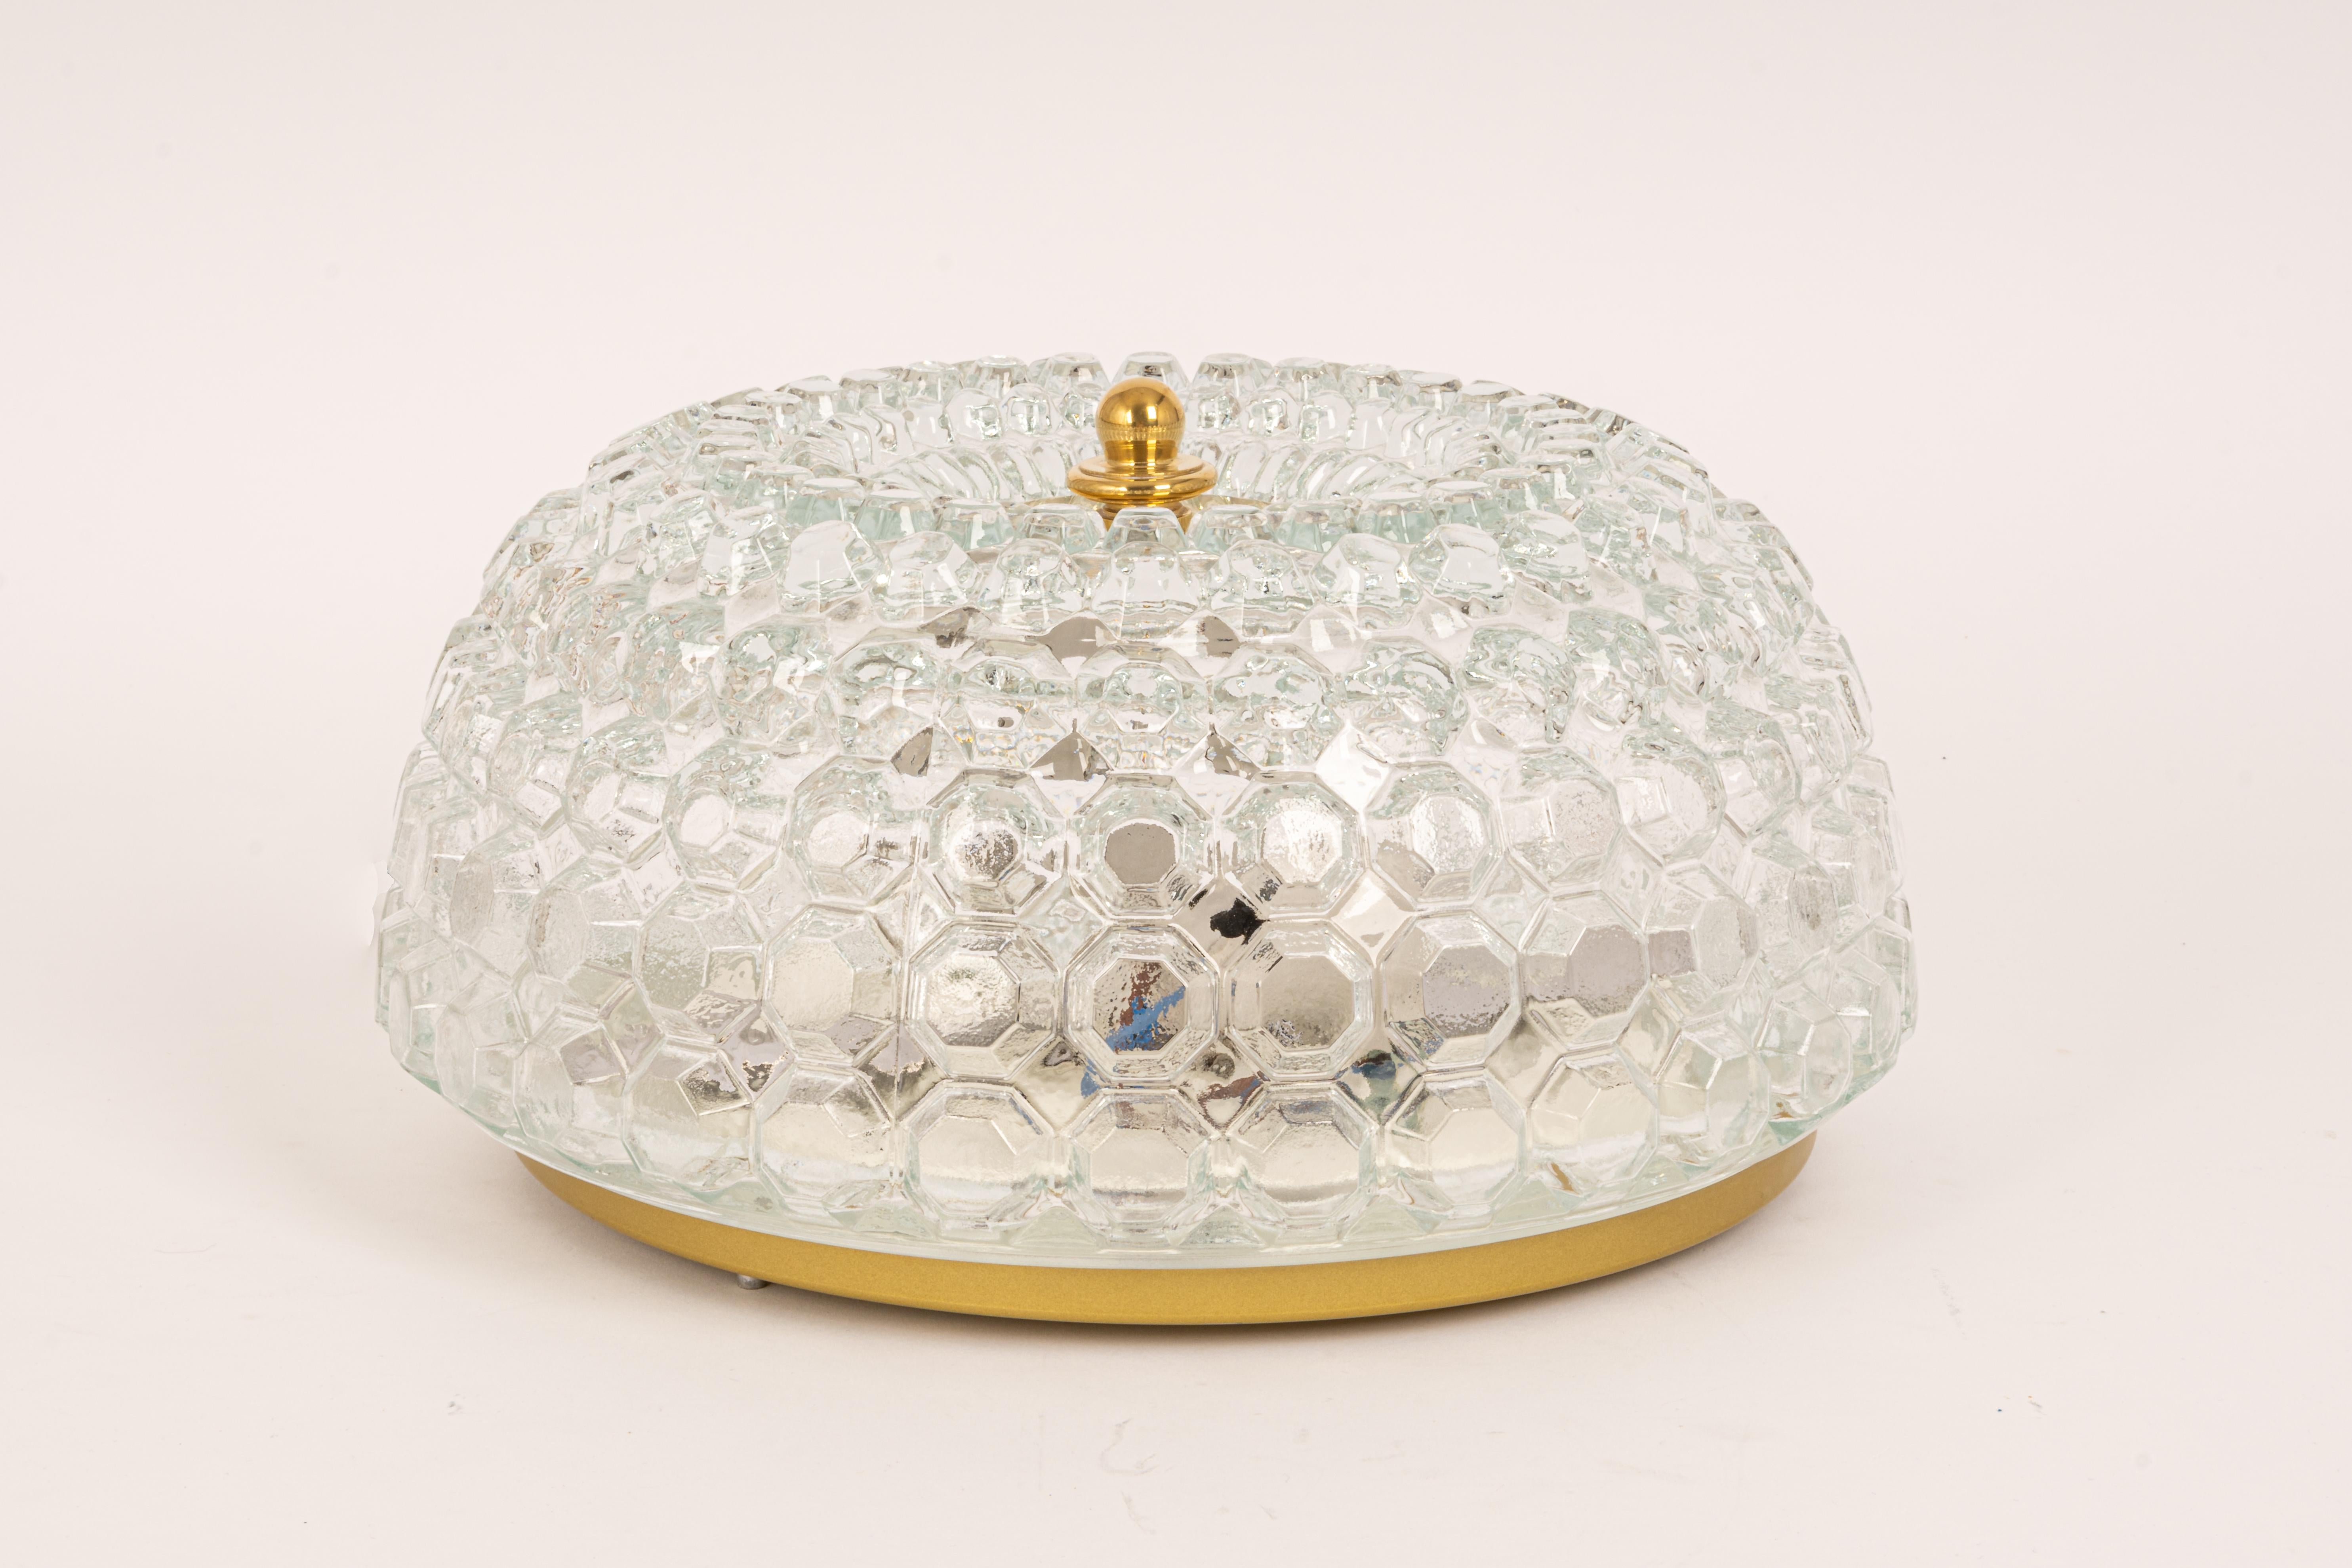 A round clear bubble glass ceiling mount fixture by Limburg, manufactured in Germany, circa the 1970s.

High quality and in very good condition. Cleaned, well-wired, and ready to use. 

Each fixture requires 2 x E27 small bulbs (up to 60 W for